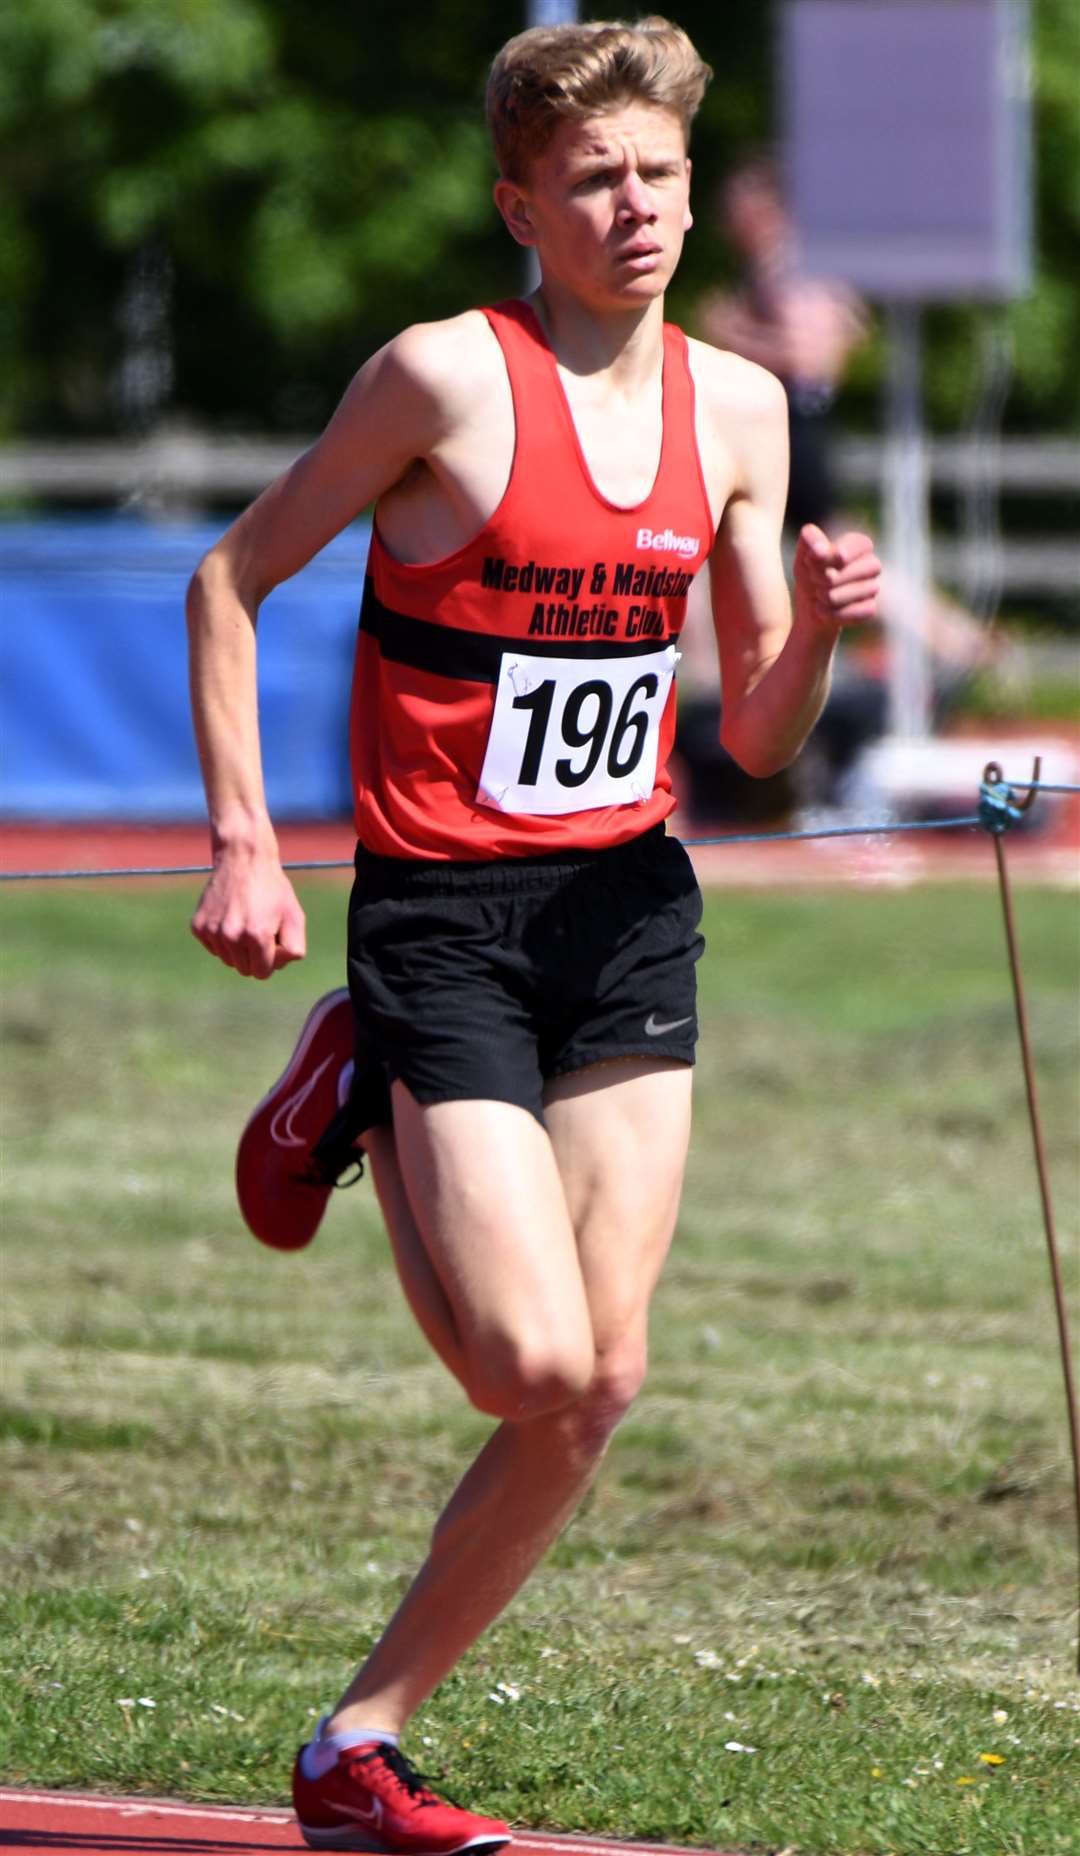 Under-17 men's 1,500m champion Hayden Gear of Medway and Maidstone. Picture: Barry Goodwin (56693566)